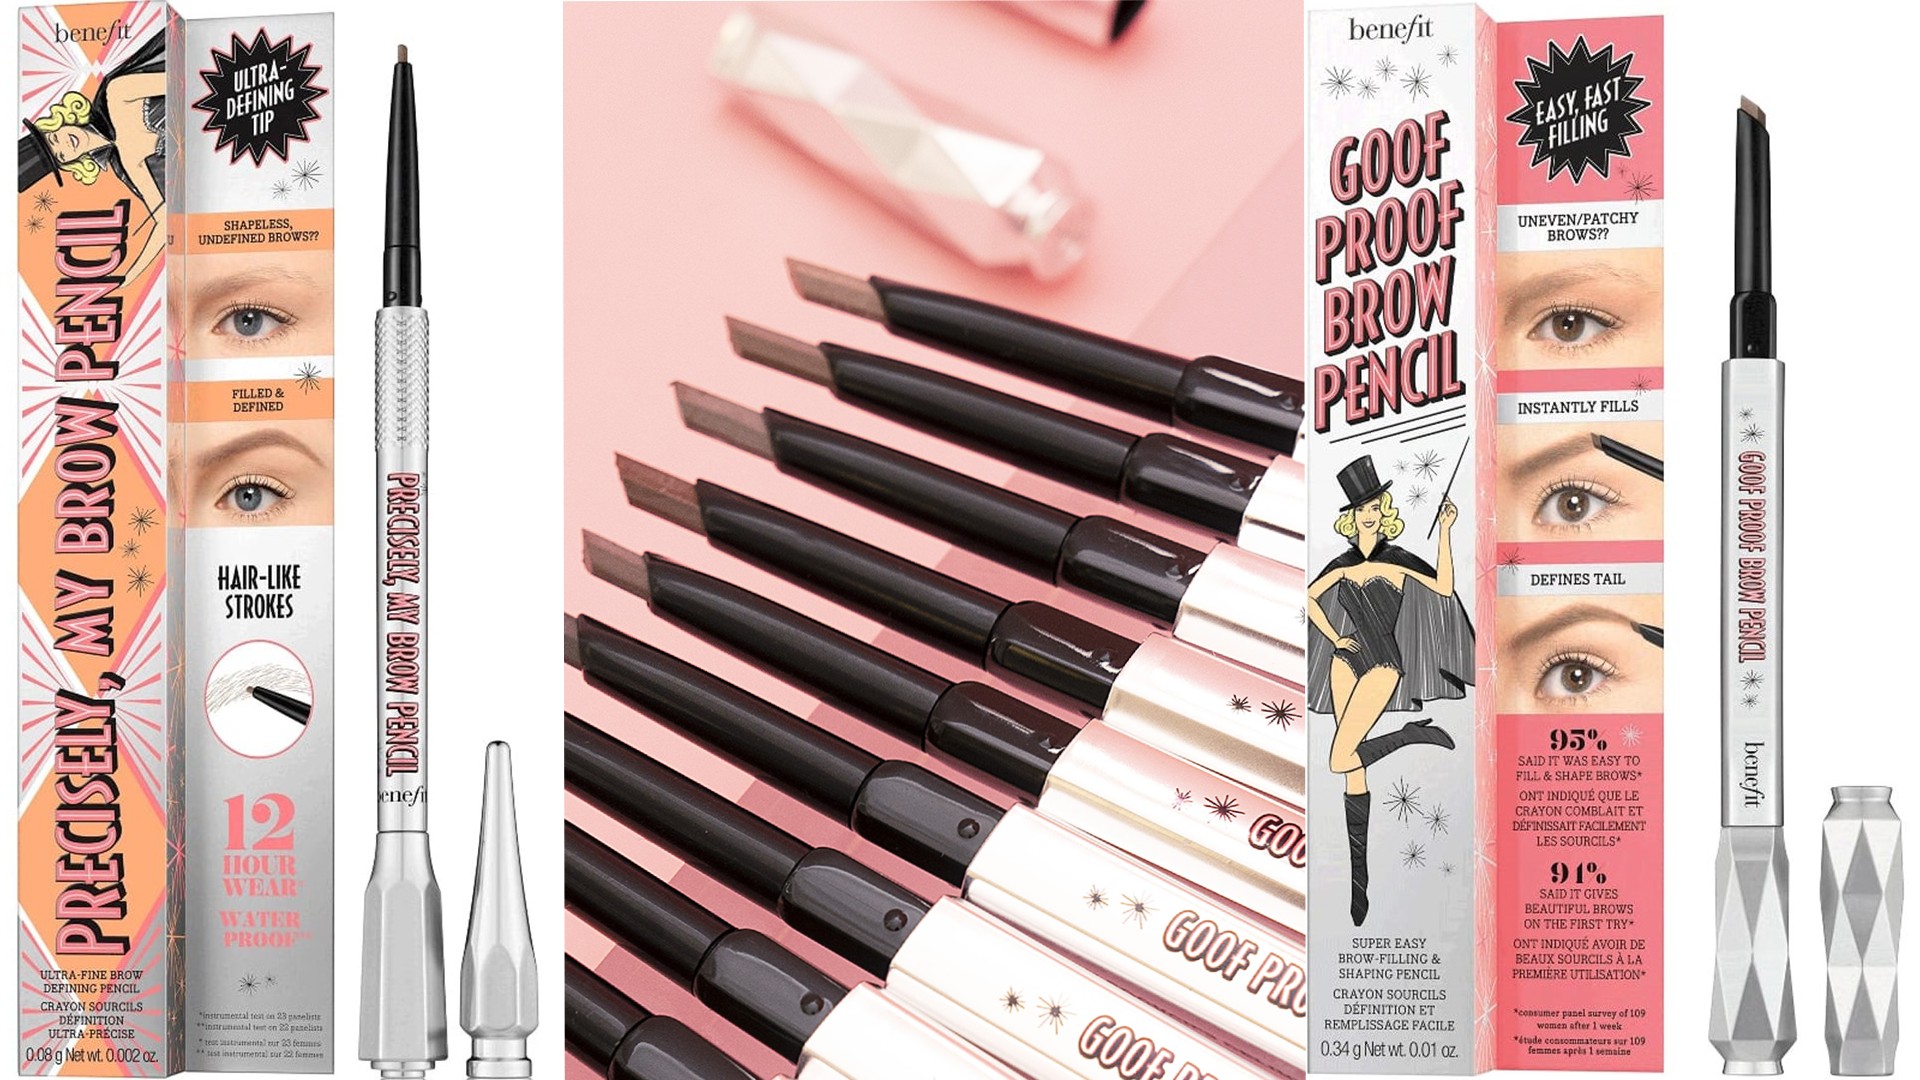 Benefit Cosmetics Teams Up With Activists For Bold Brows  CampaignHelloGiggles